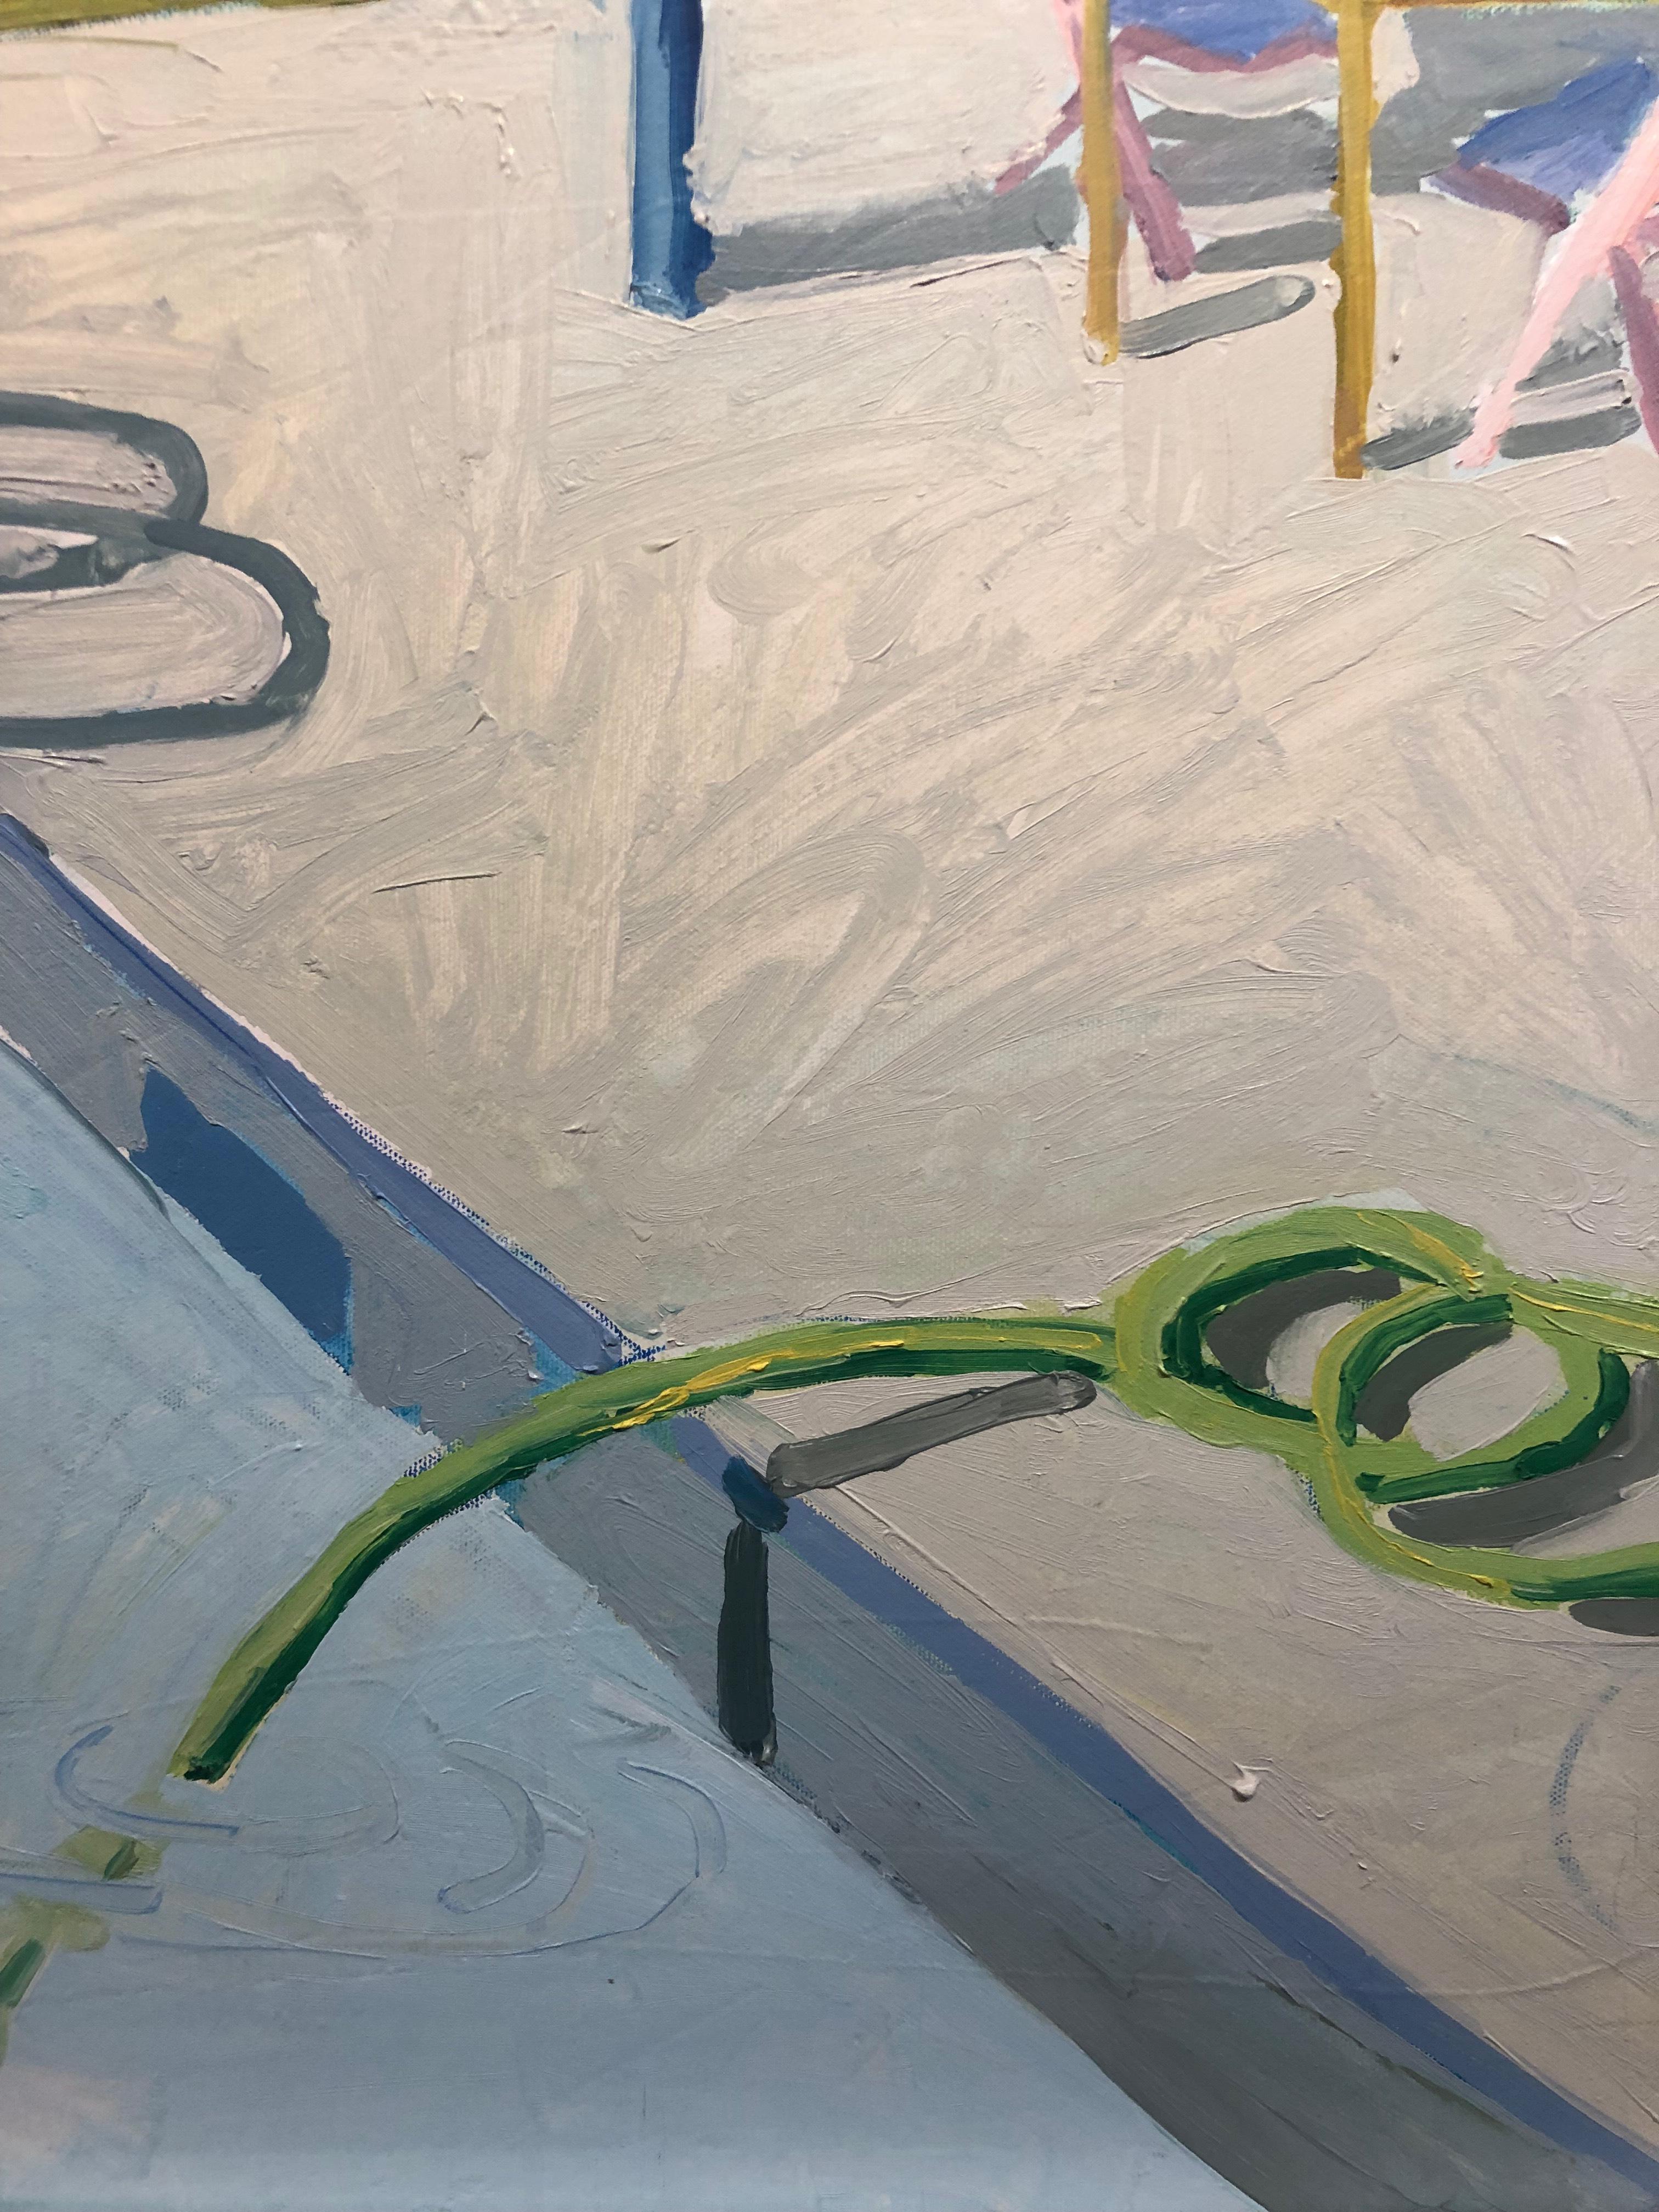 Salad Days, Hose, Landscape Painting with Pool and Hose in Soft Blue and Green  2